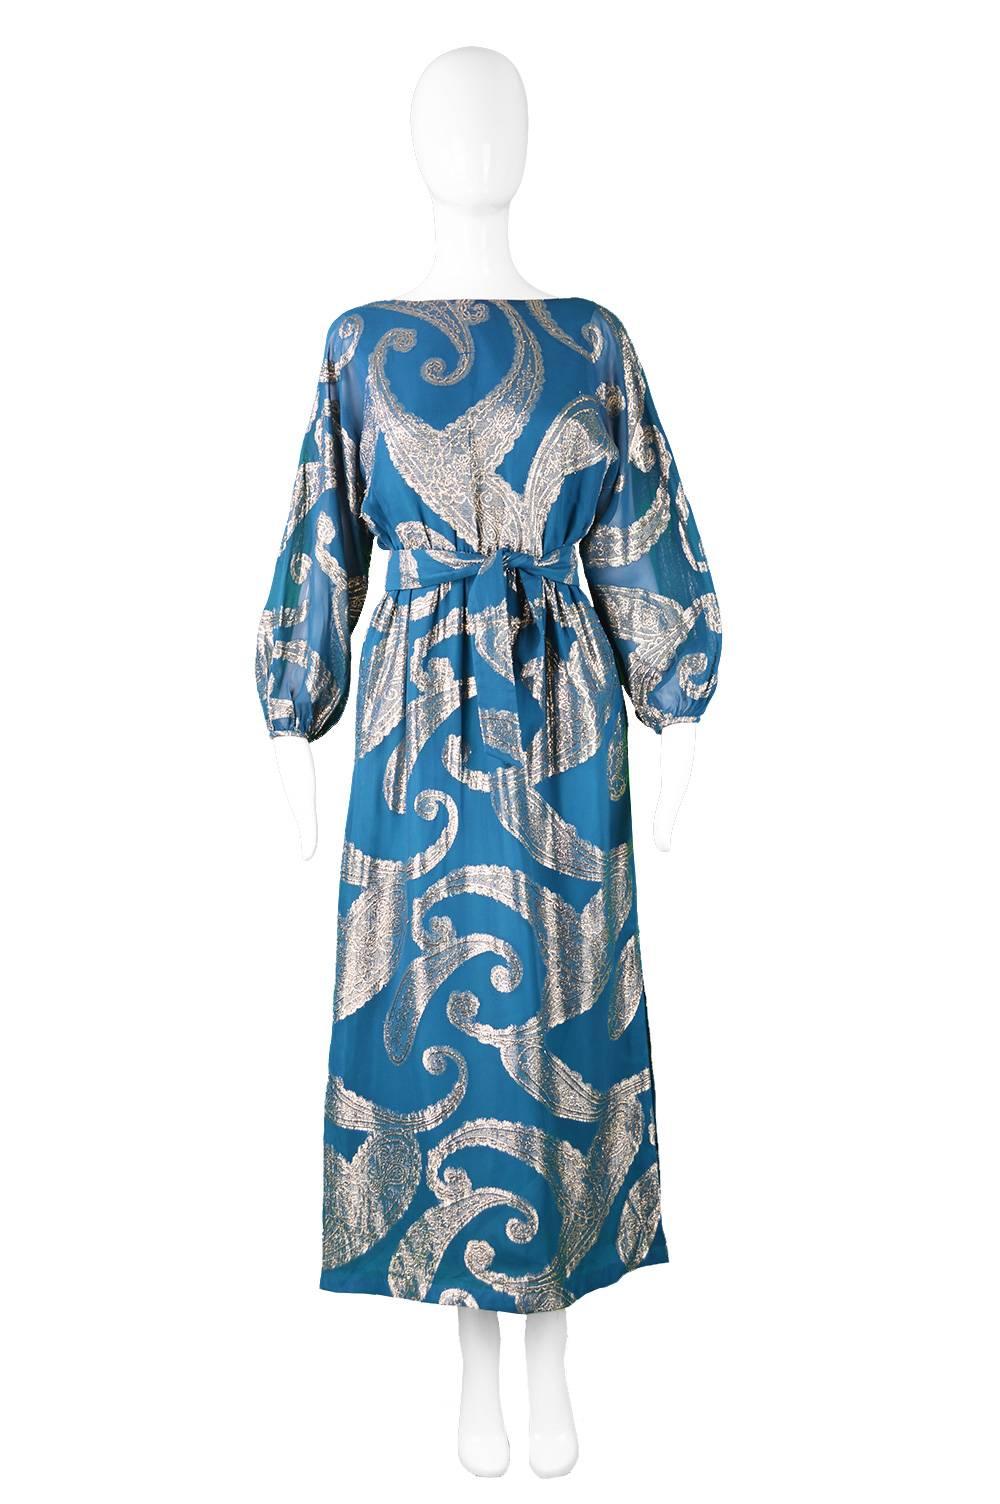 A beautiful vintage Victor Costa maxi dress from the early 70s in a dark teal chiffon with an Indian inspired gold paisley metallic lame brocade throughout. With sheer balloon sleeves, an elasticated waist and a half belt creating a feminine,